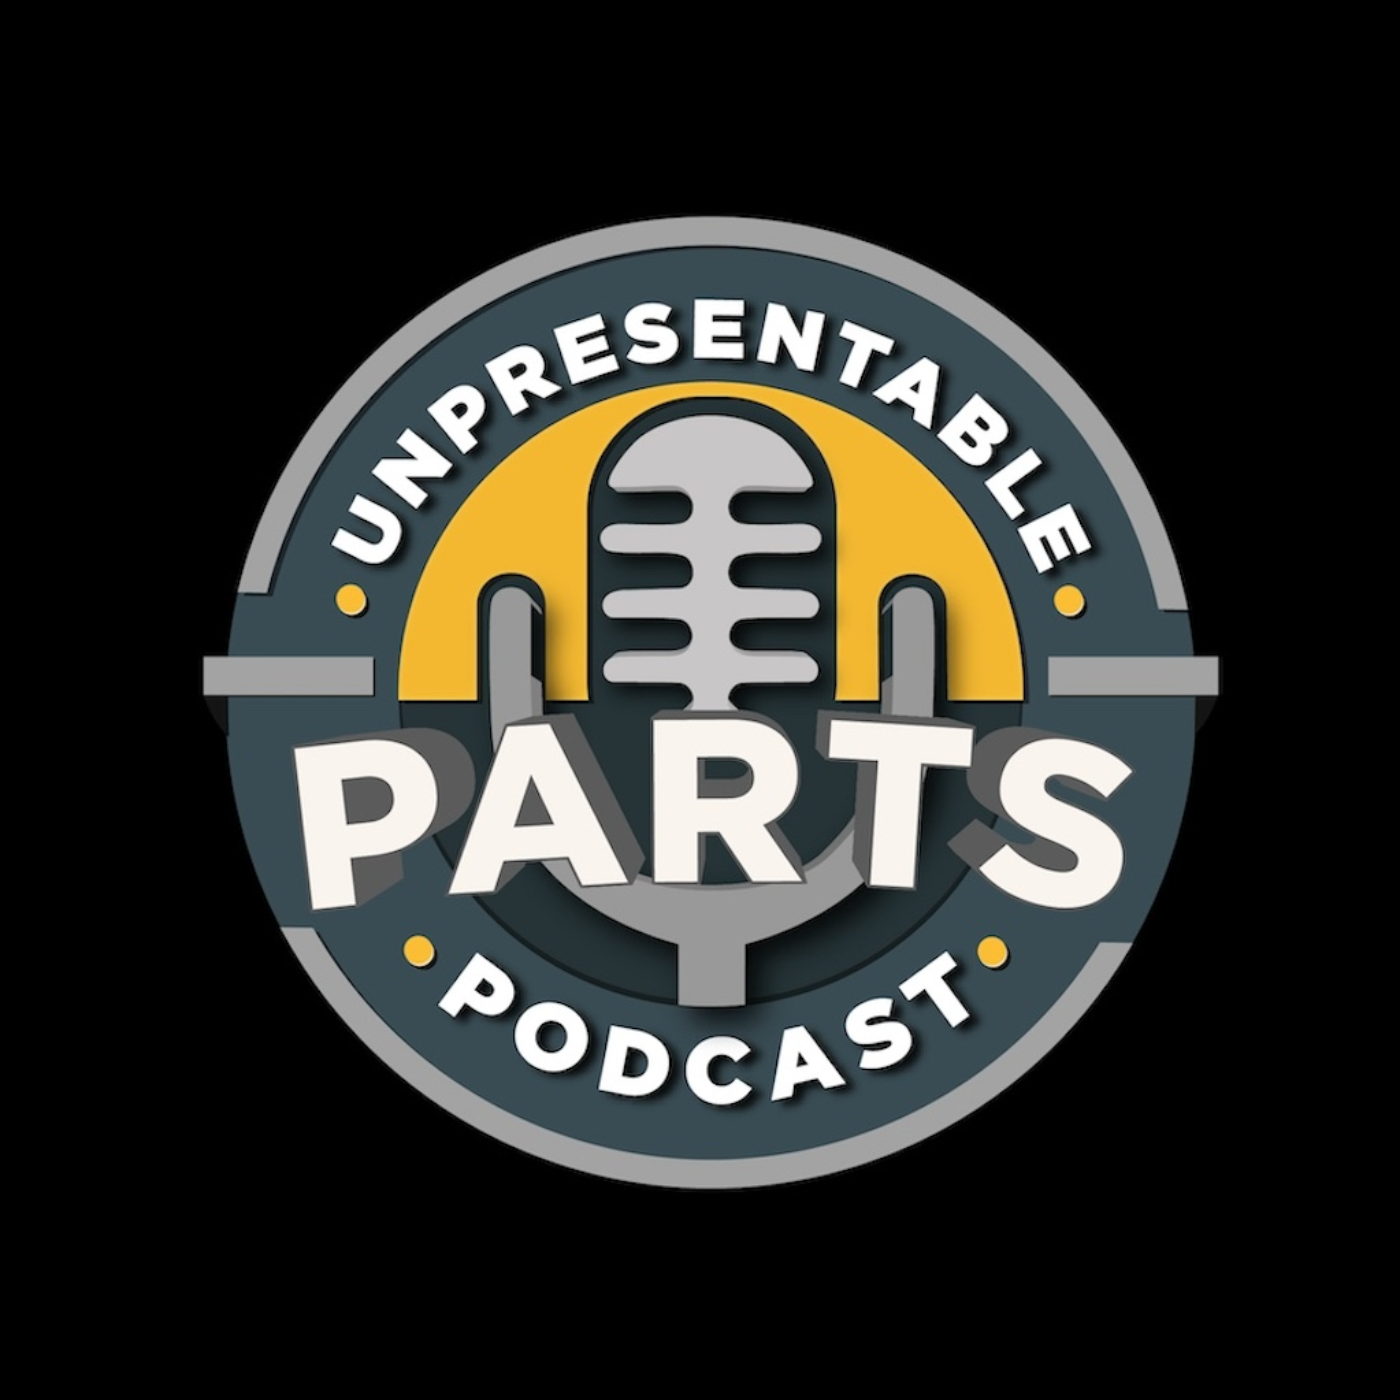 Welcome to the Unpresentable Parts Podcast